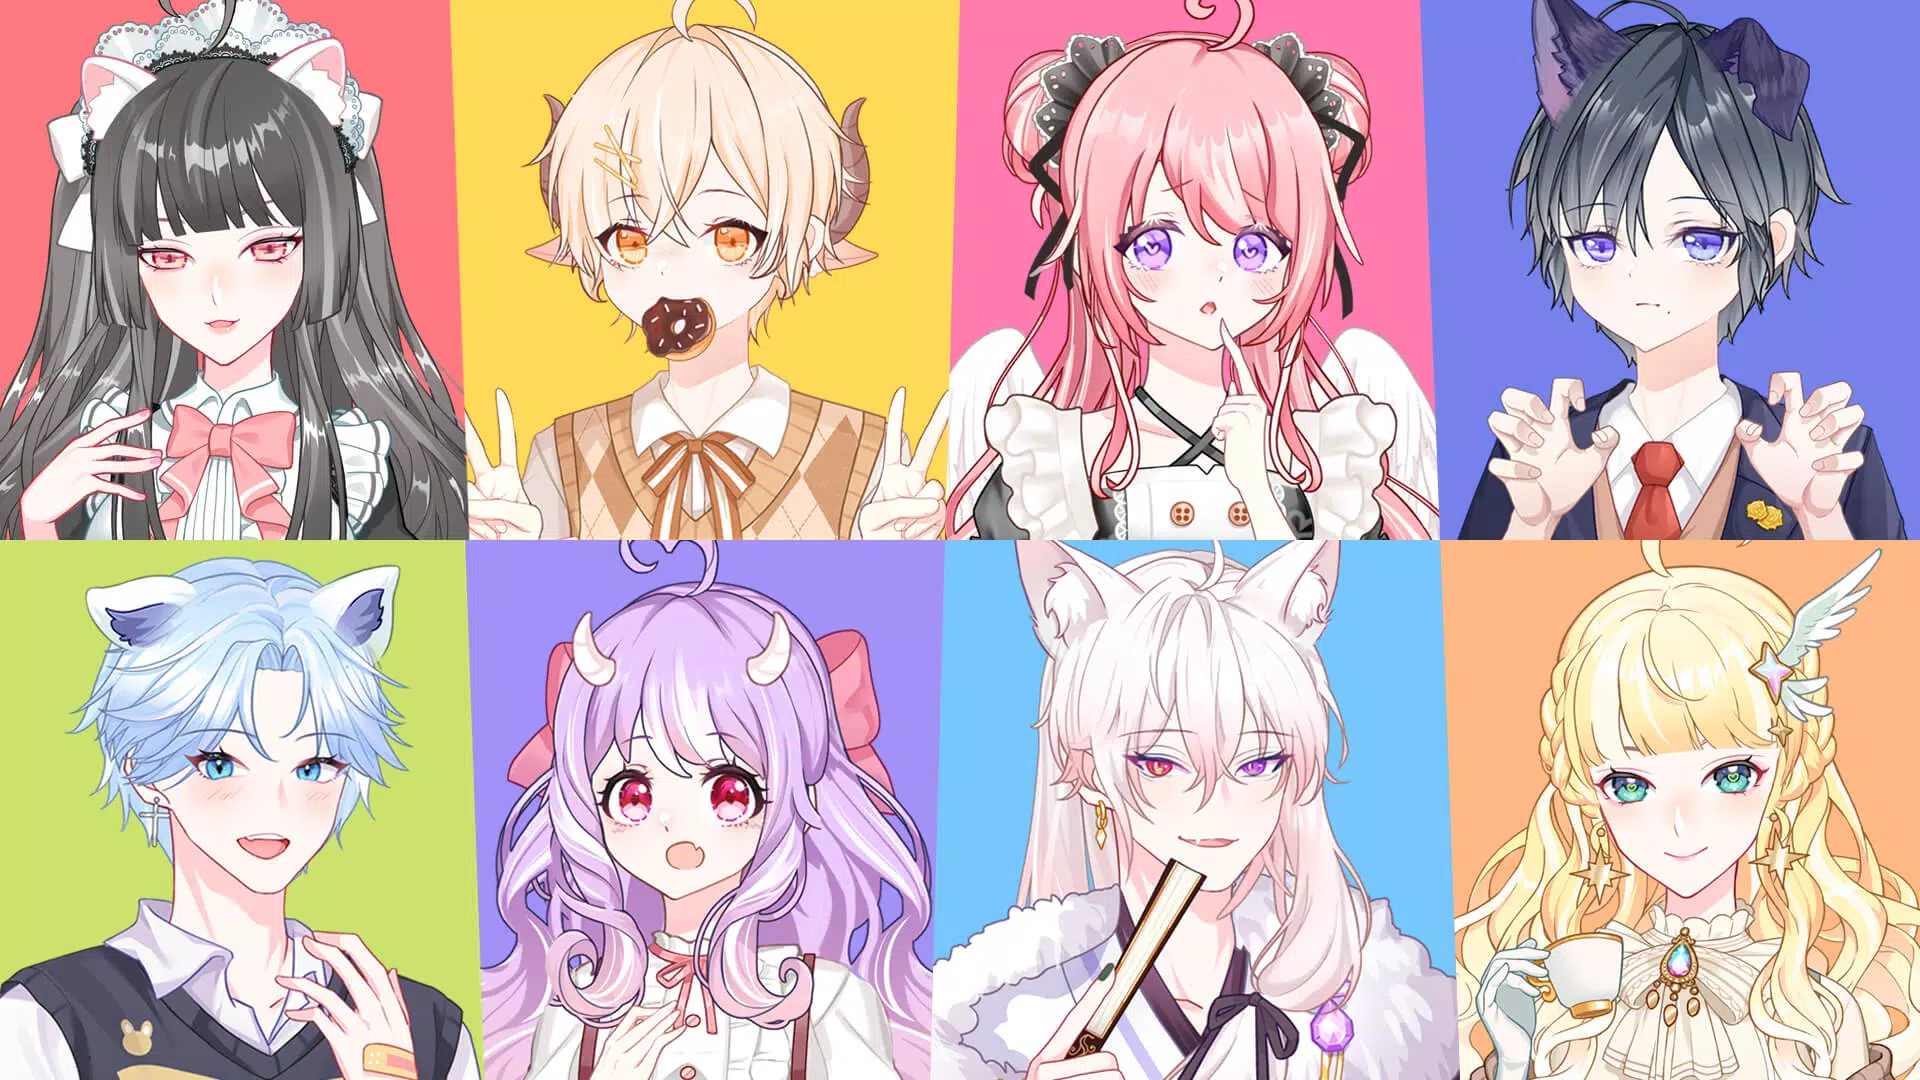 Anime Avatar Maker 2 APK for Android Download